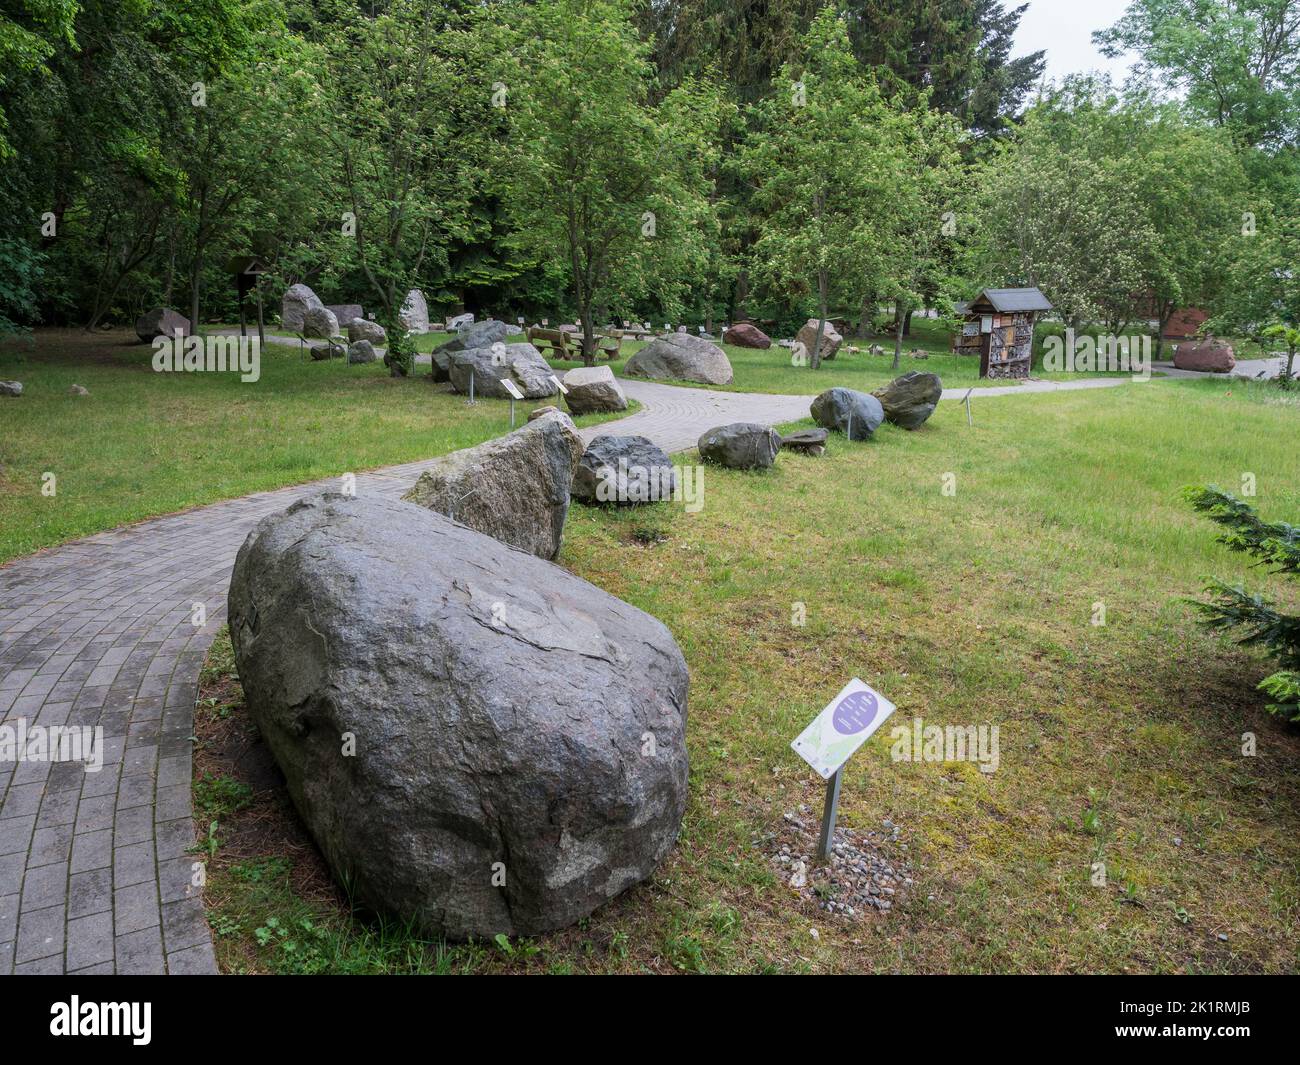 Exhibition of rocks moved during the ice age from Scandinavia to Germany, Pudagla, Usedom island, Germany Stock Photo